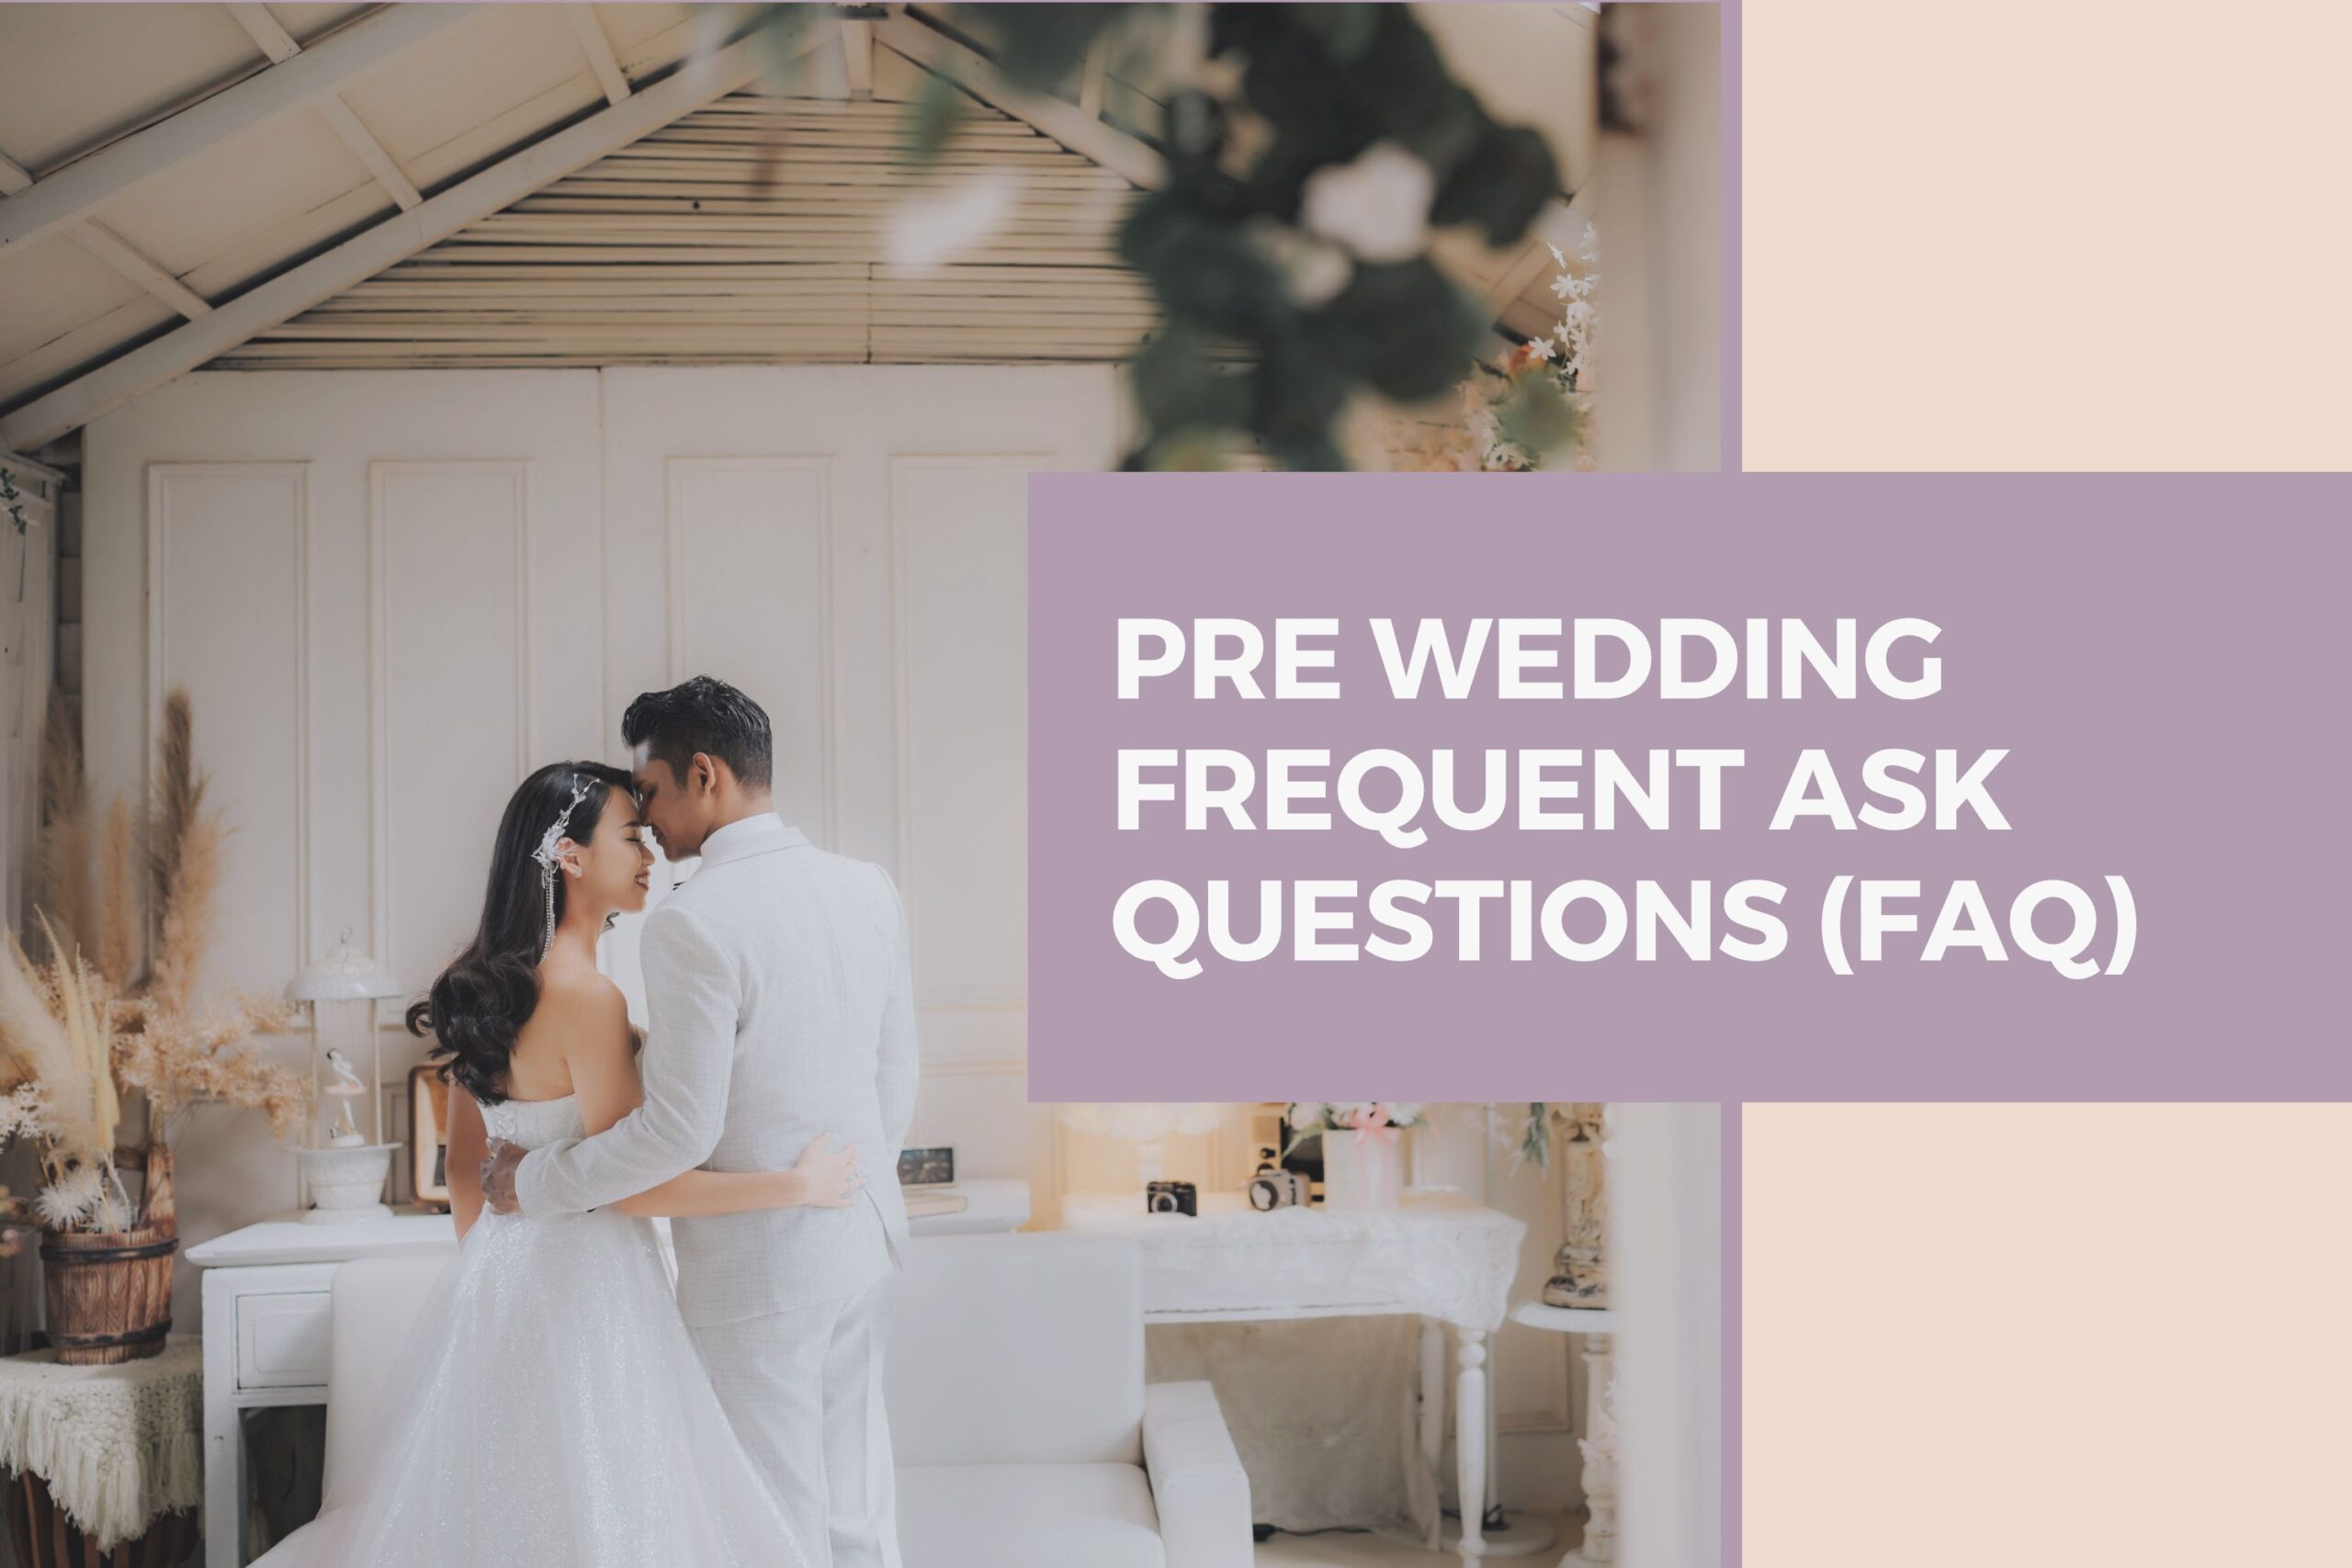 Pre Wedding Frequent Ask Questions (FAQ)